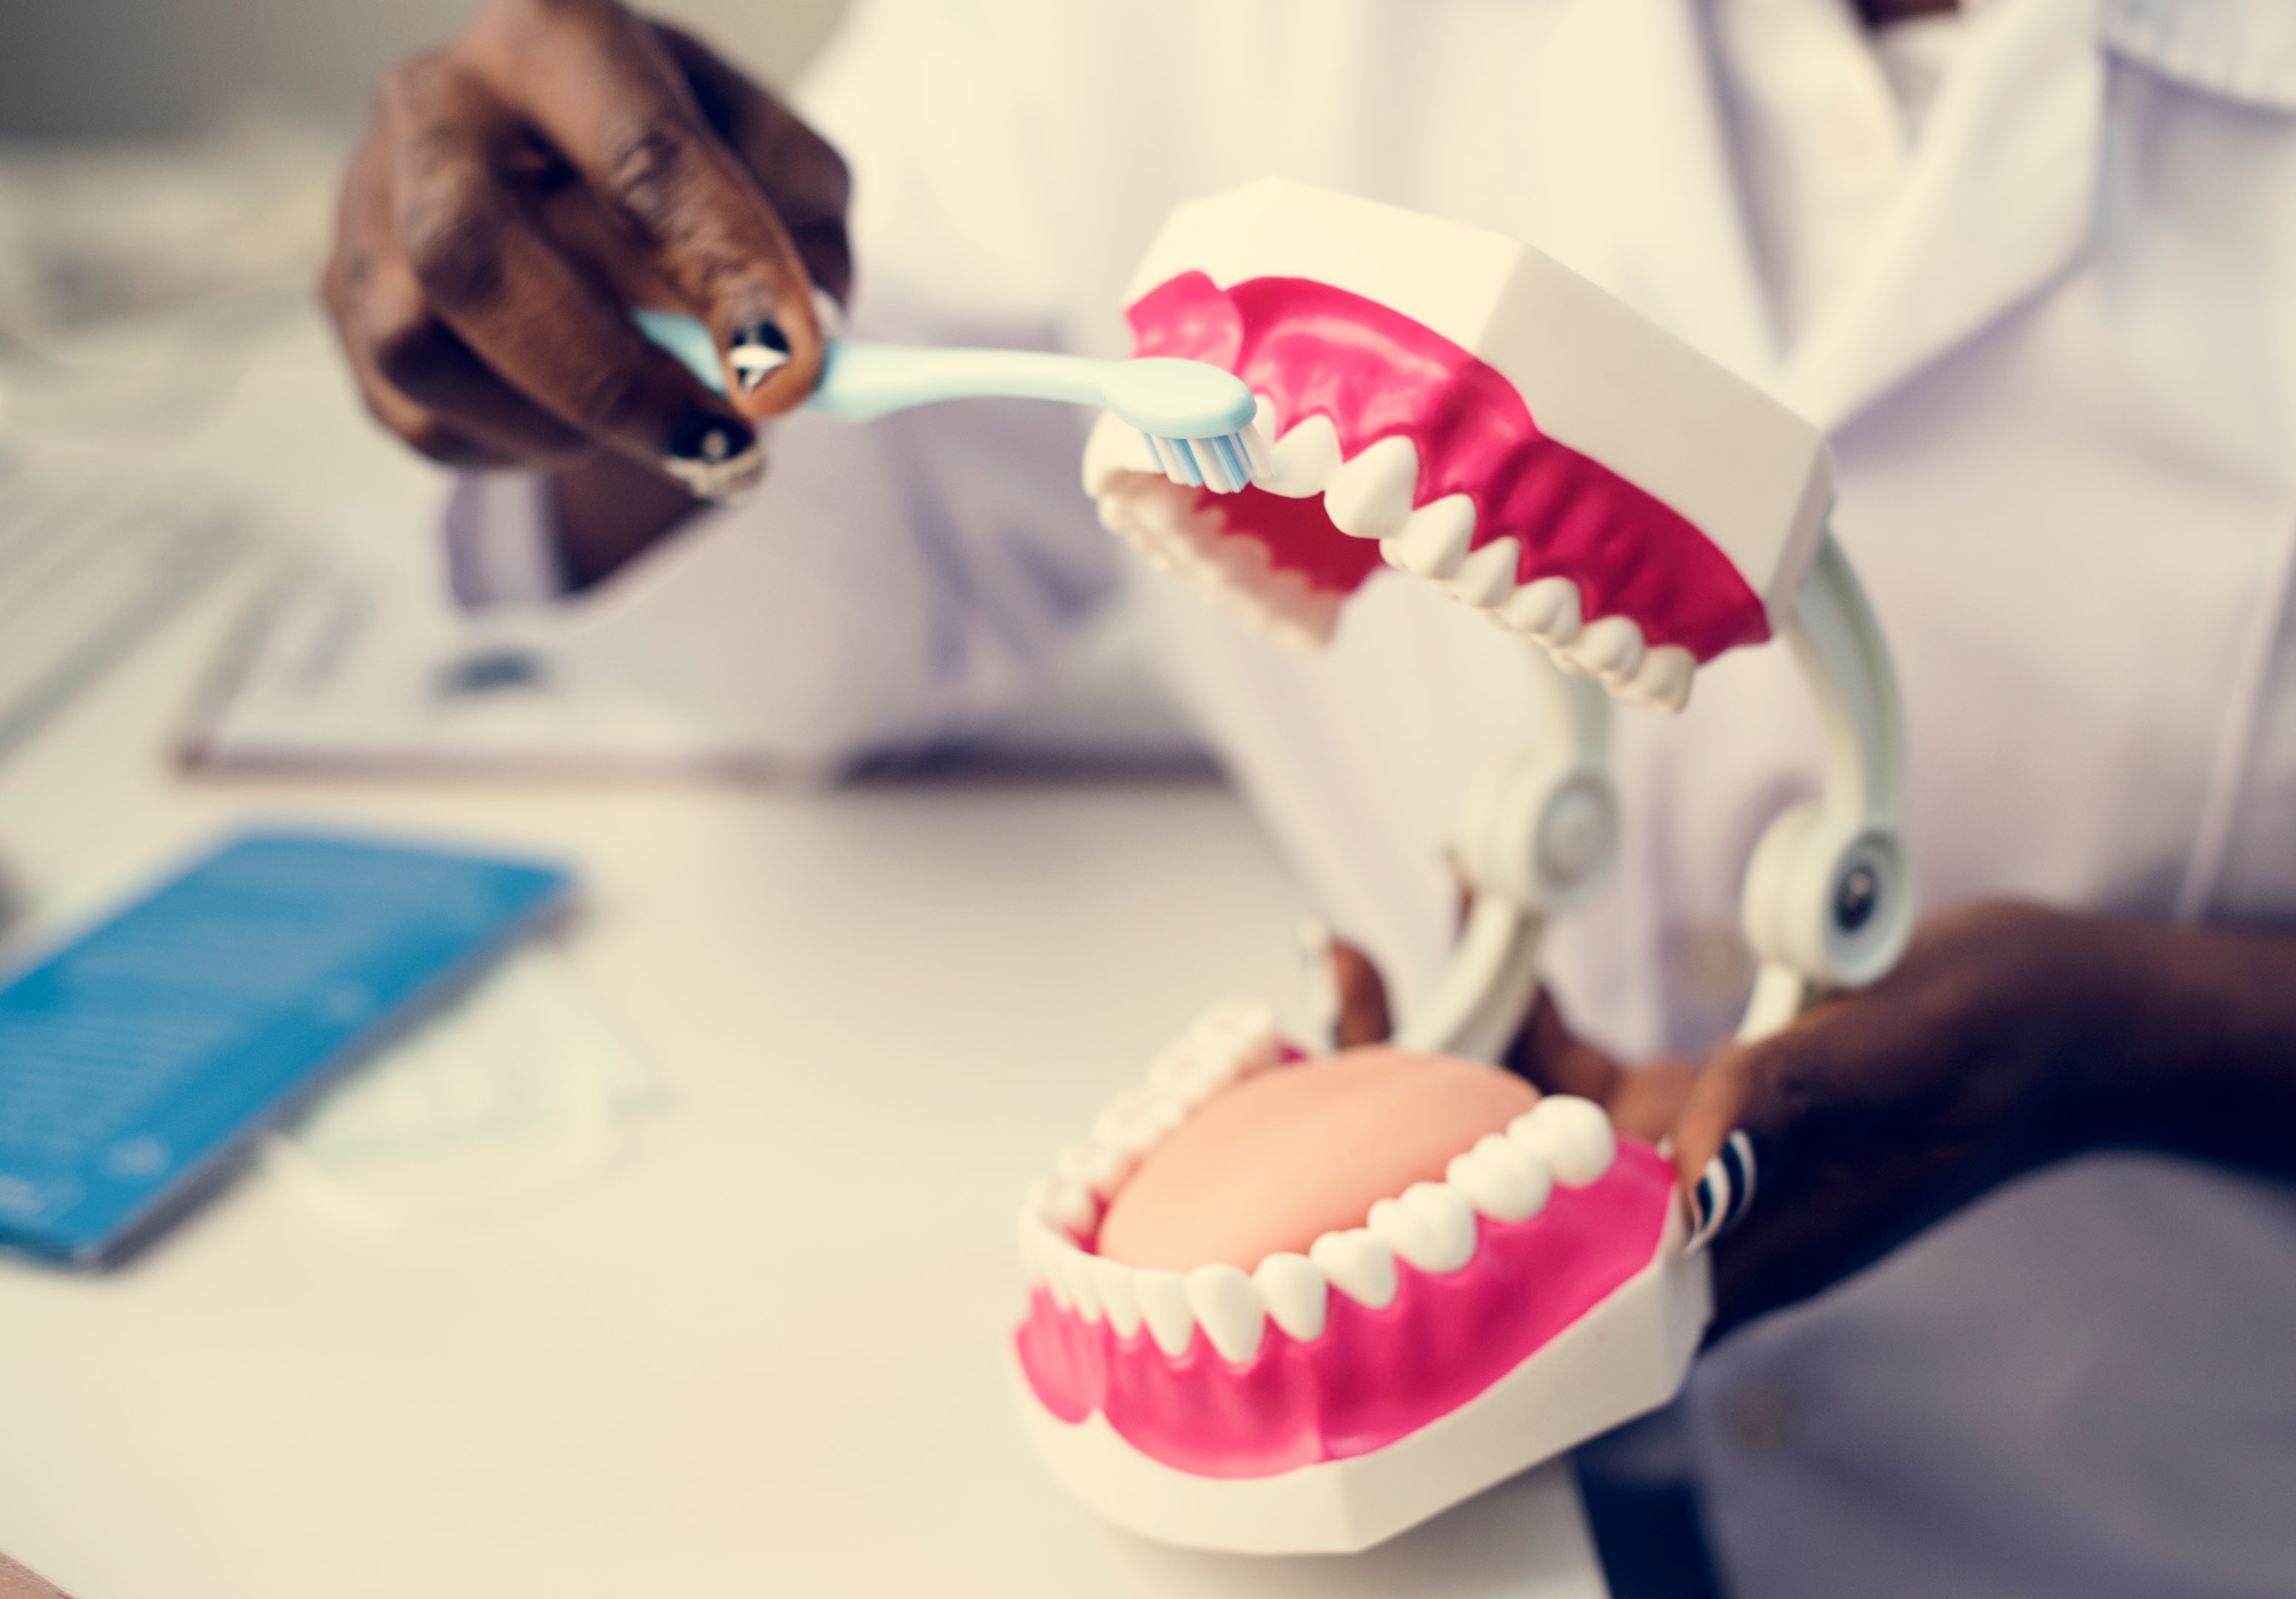 Person brushing dental models to show proper oral care